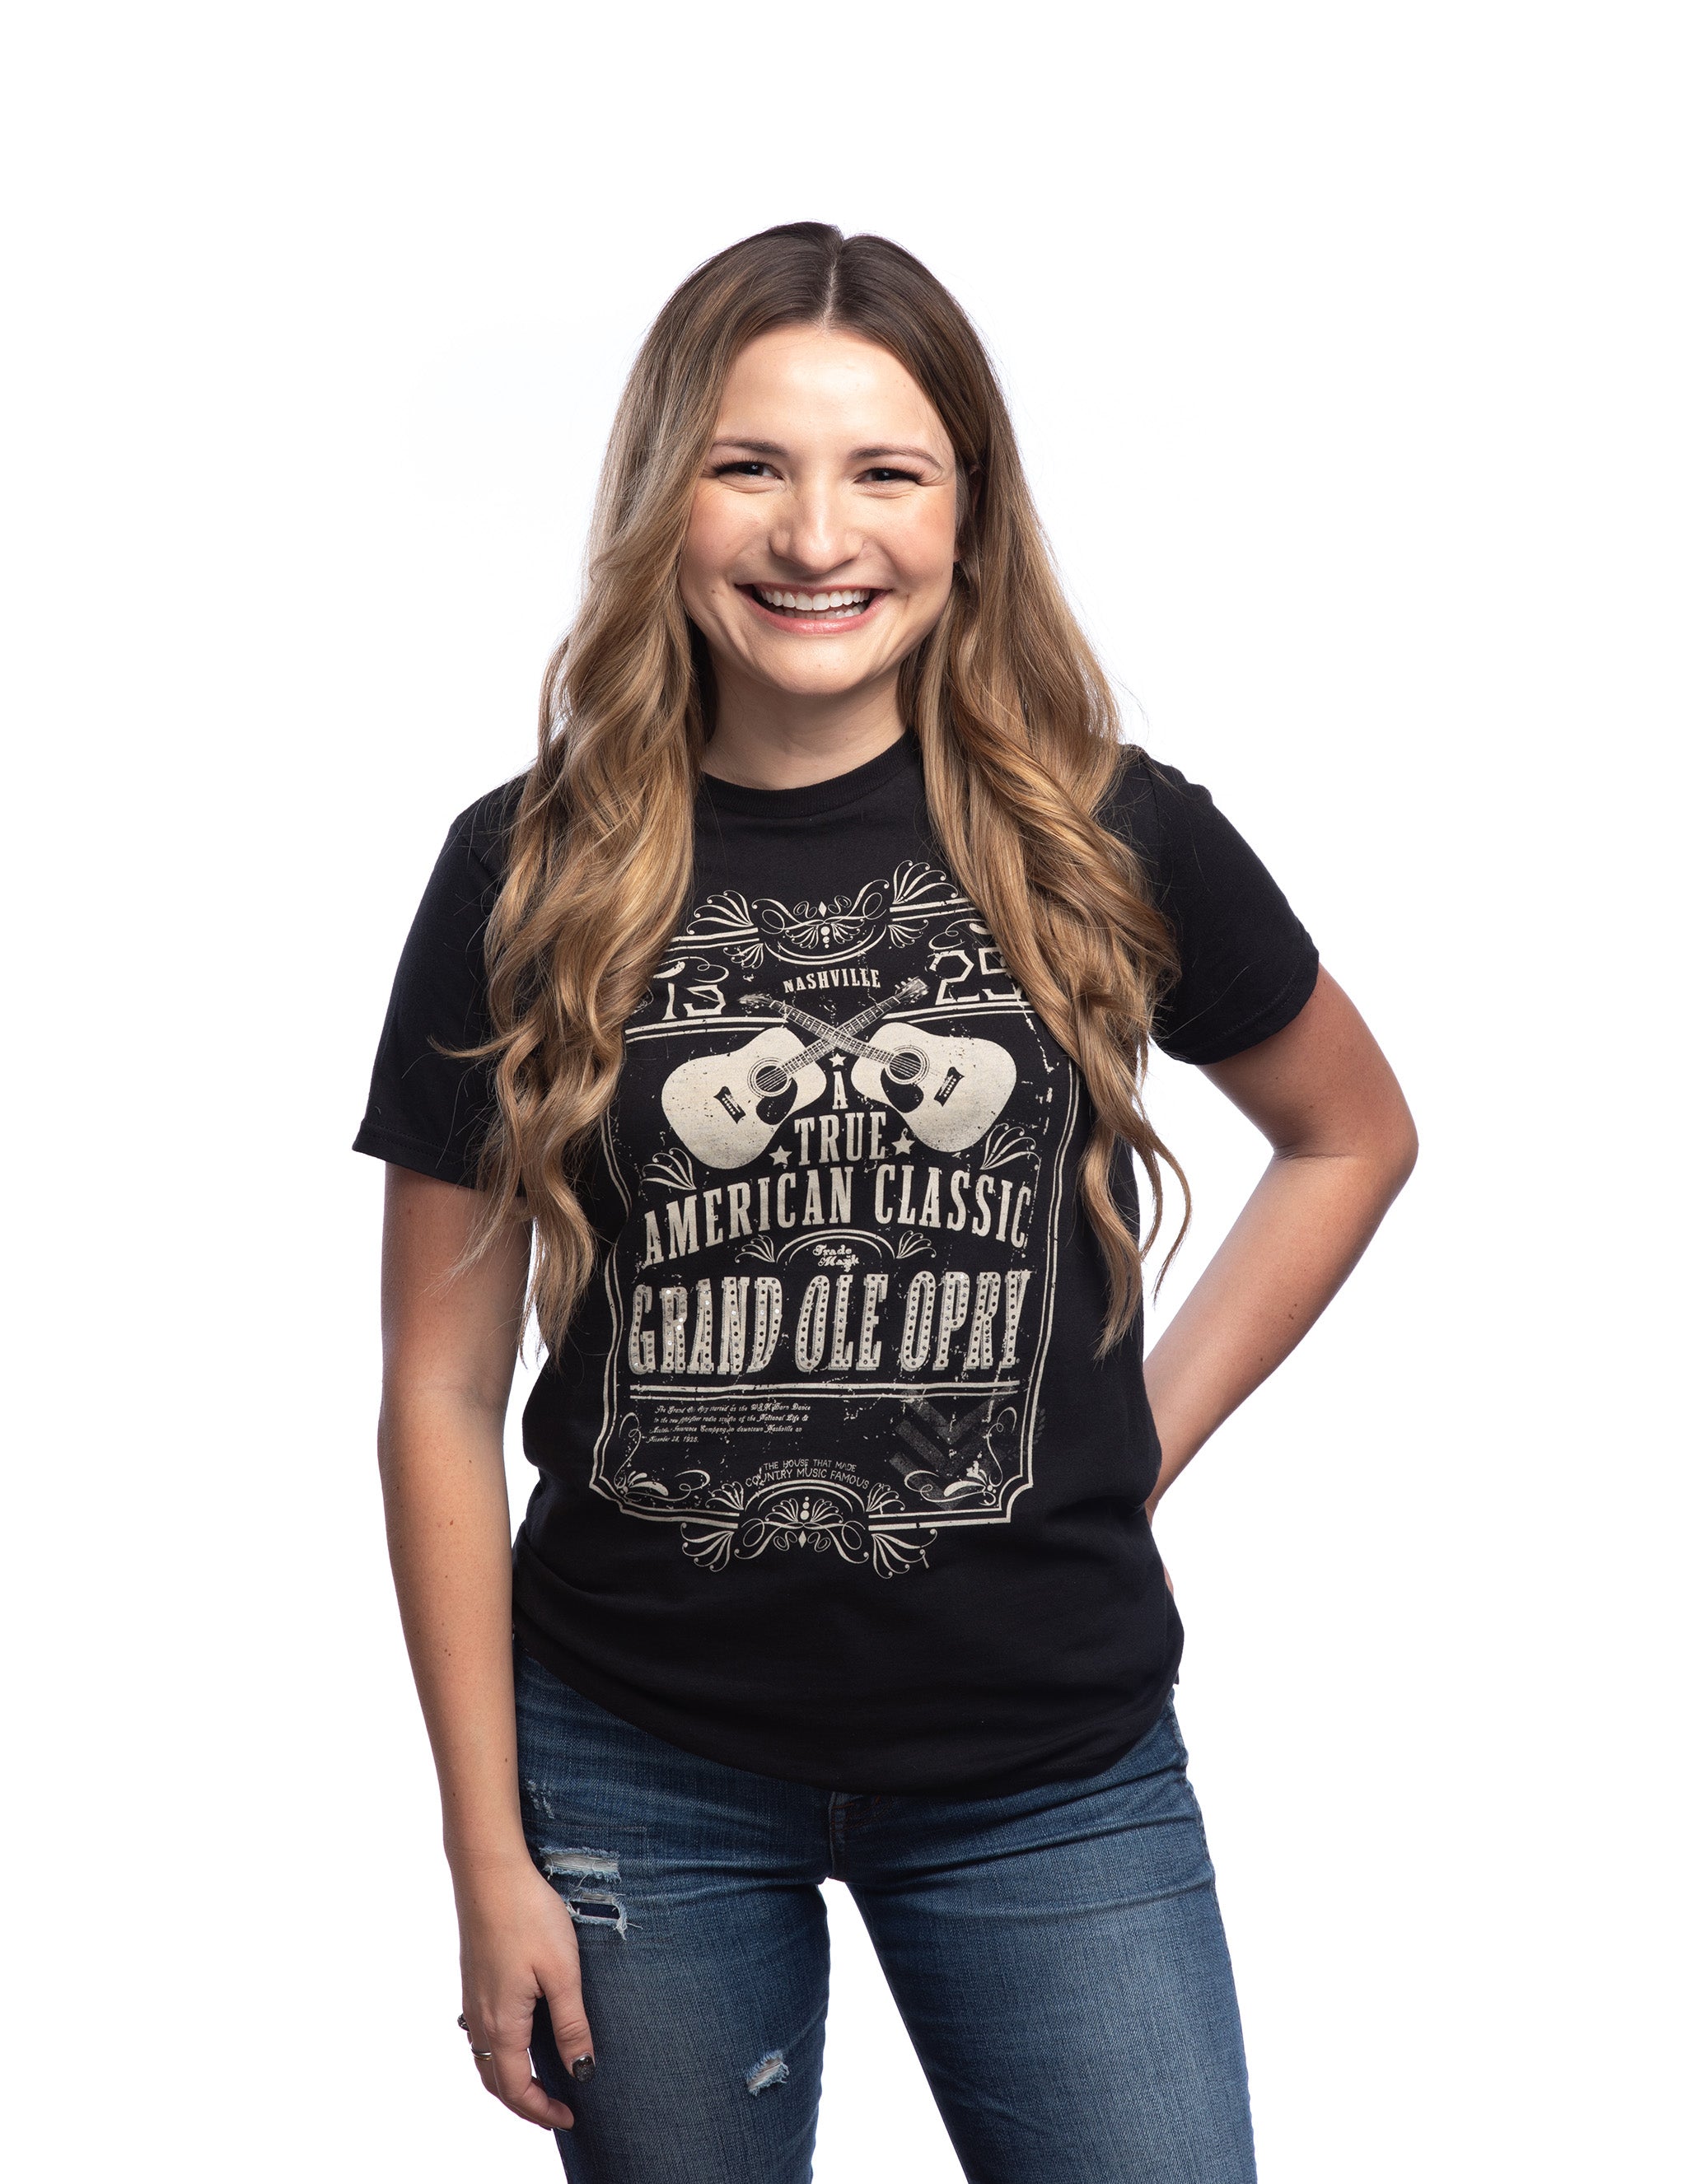 Opry American Classic Poster T-Shirt